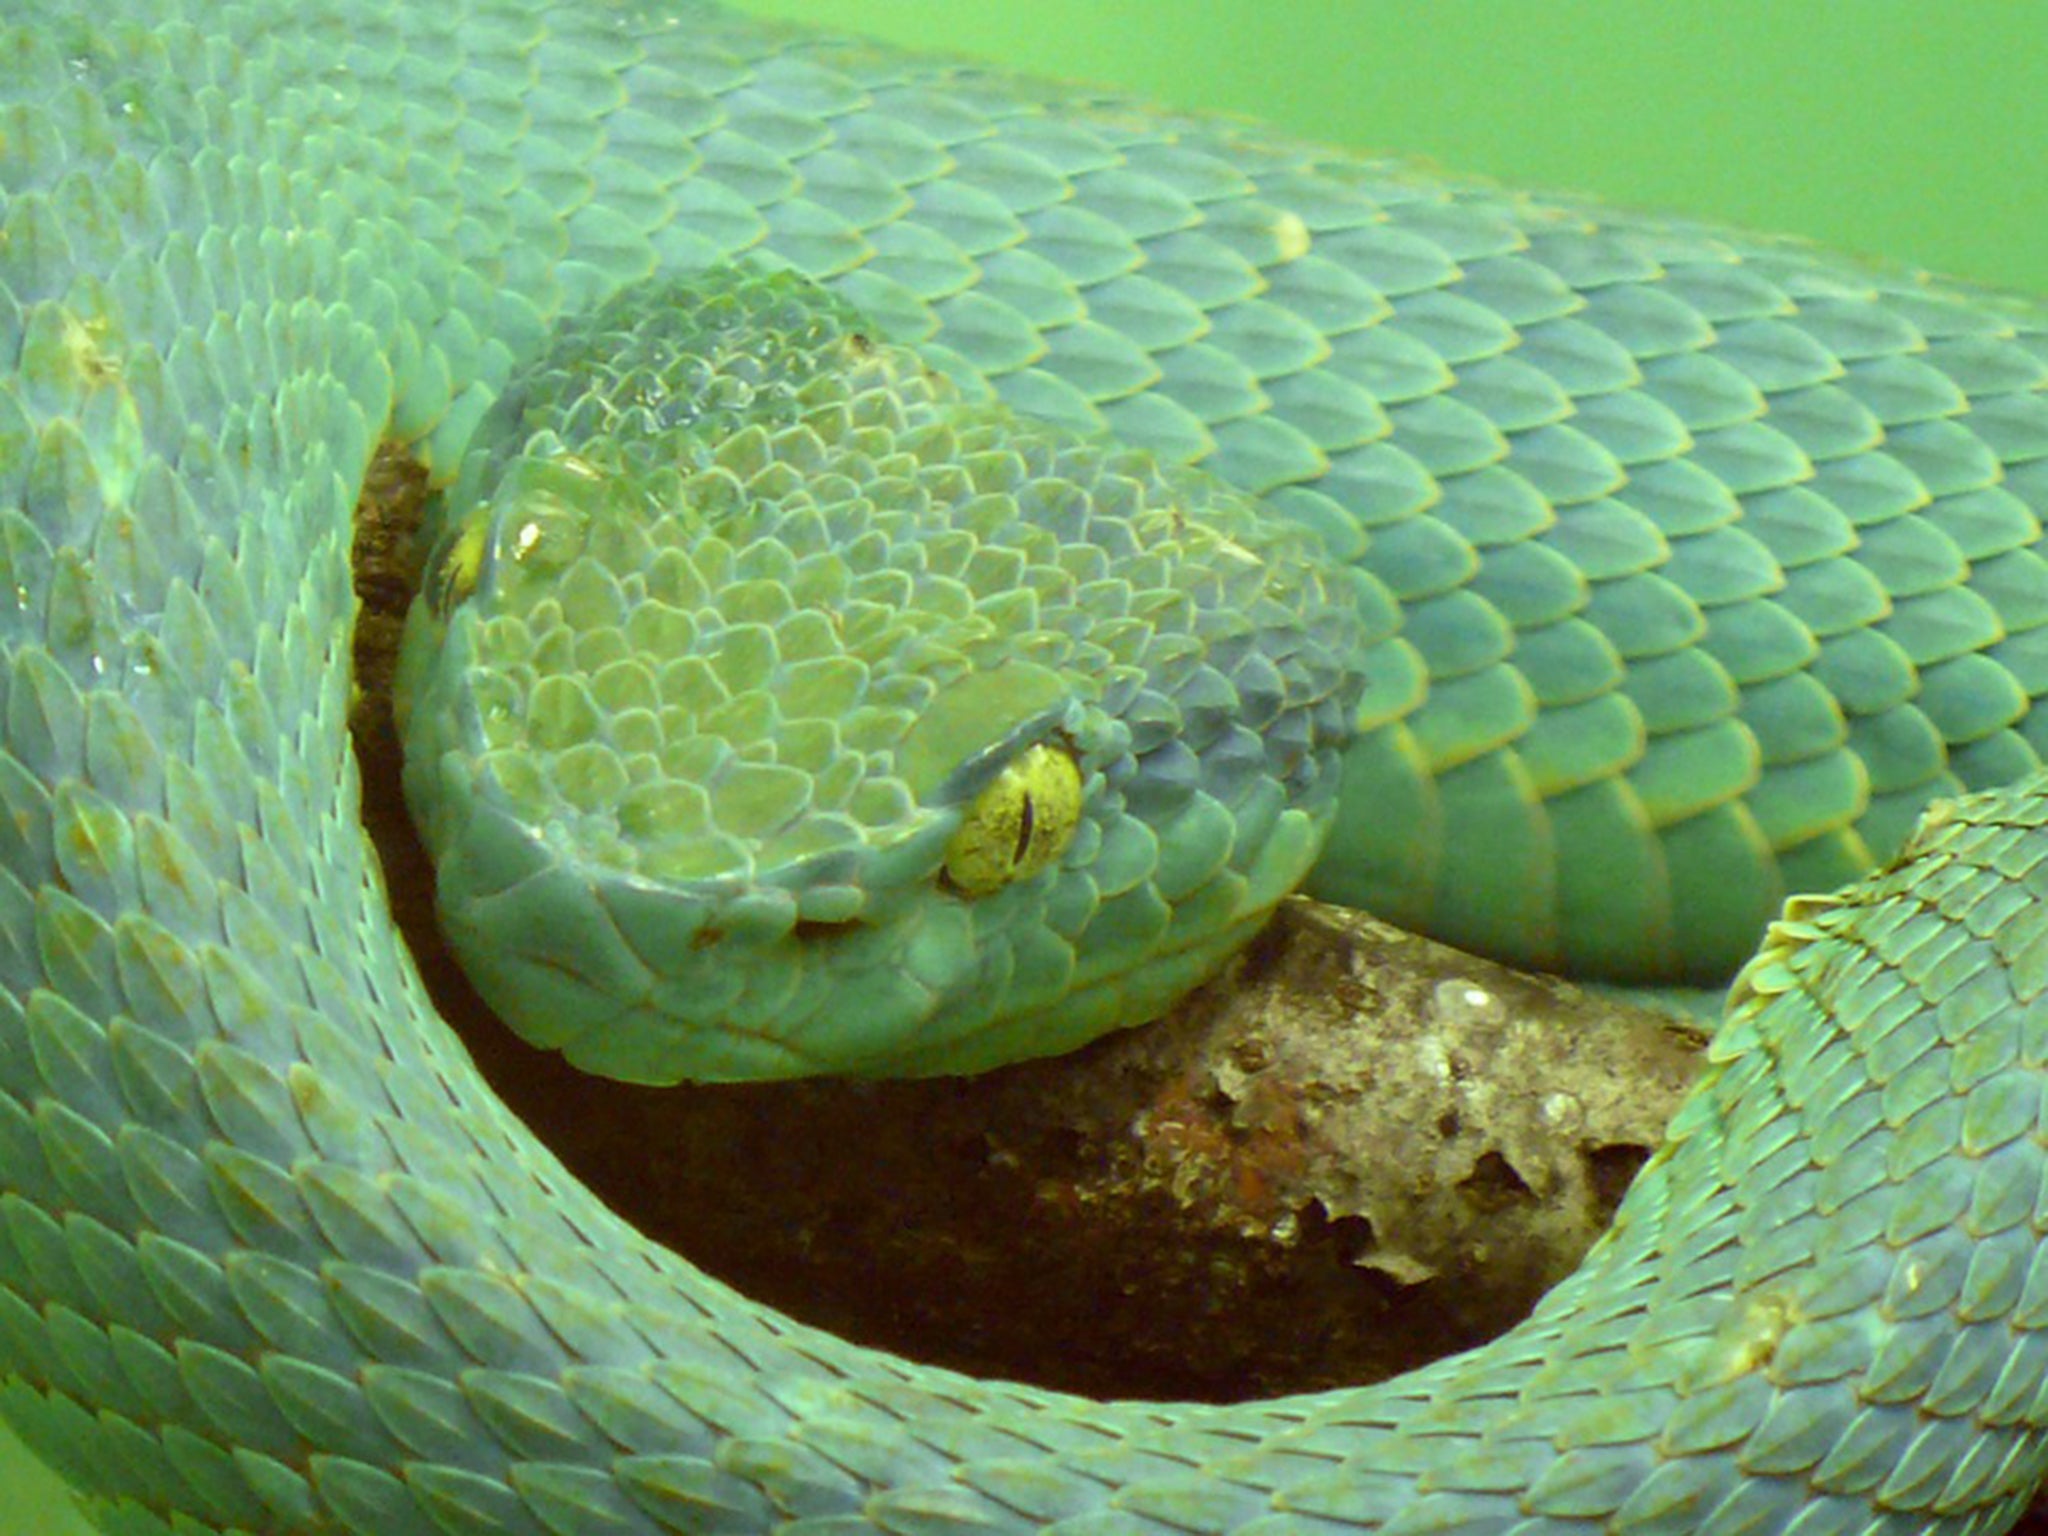 Mailing foreign snakes is a federal offense - and extremely dangerous